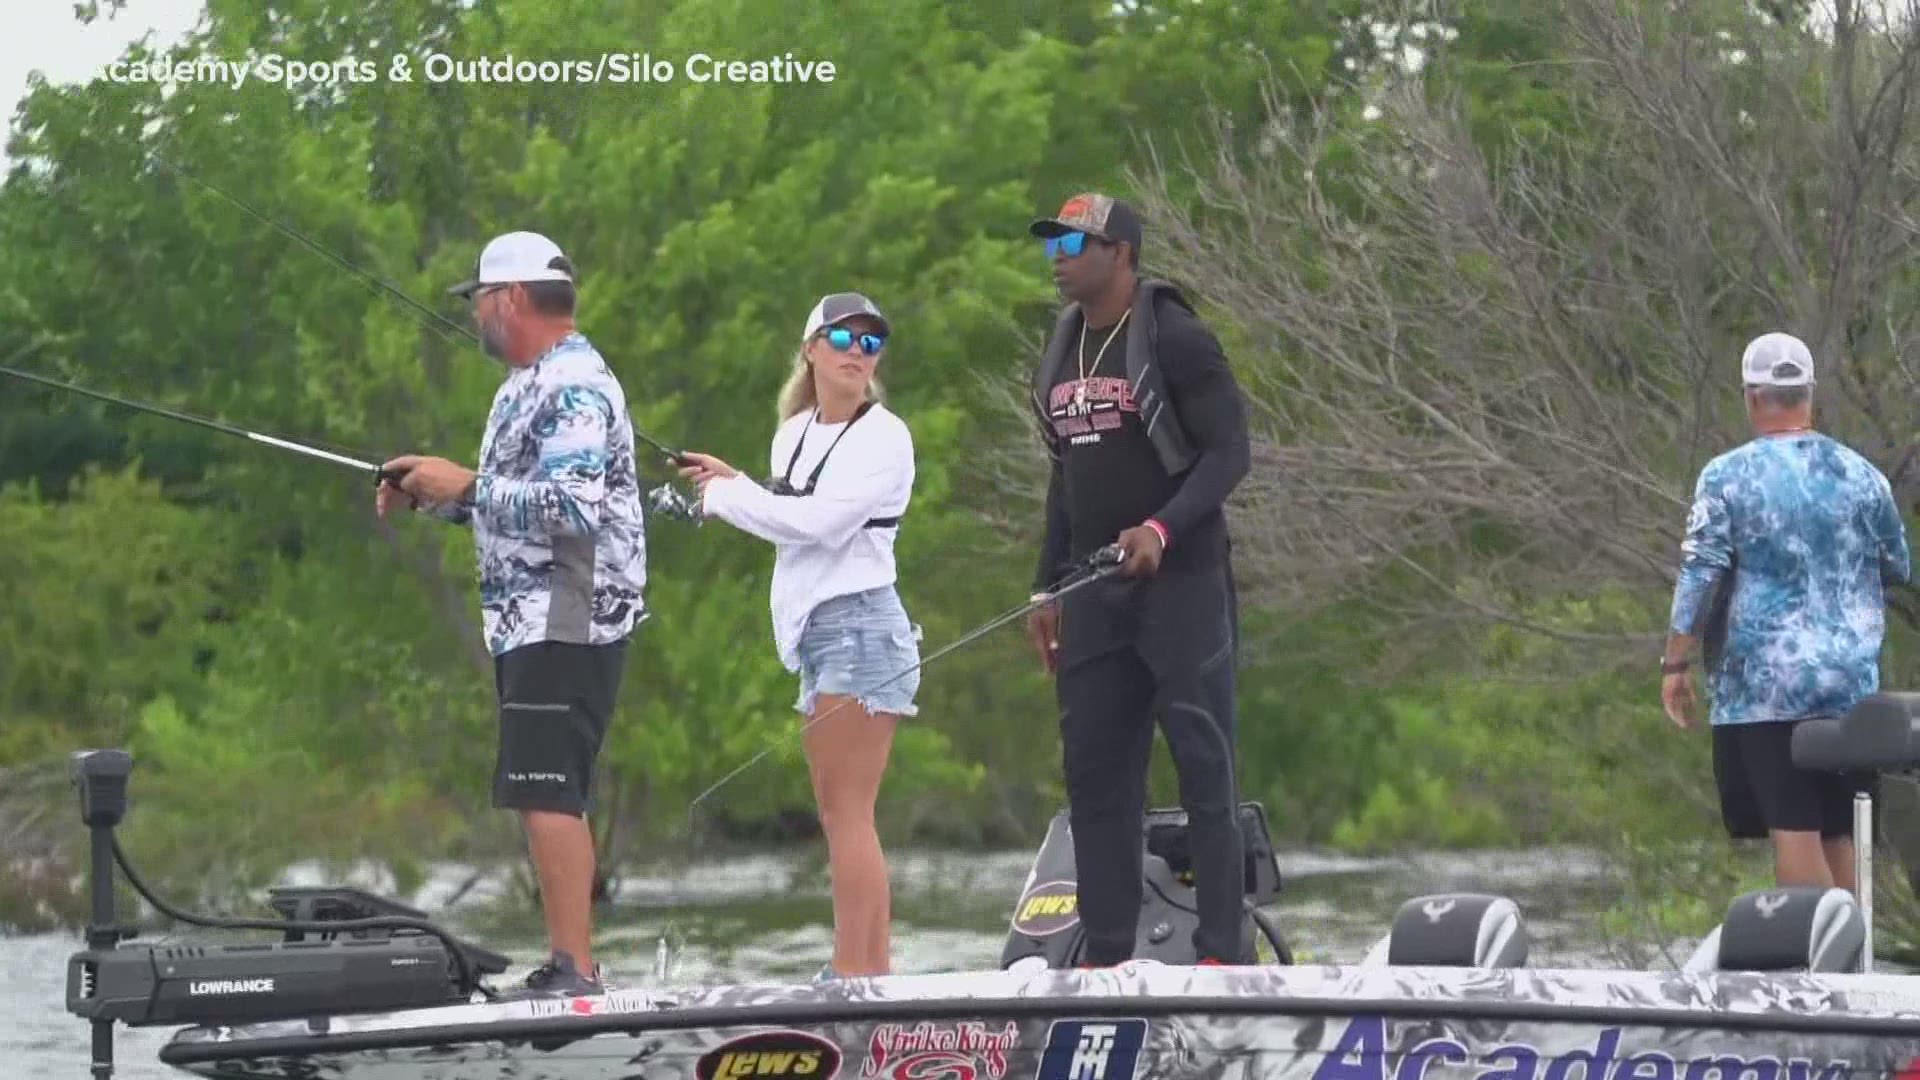 The event leads up to this weekend's "Super Bowl of fishing."